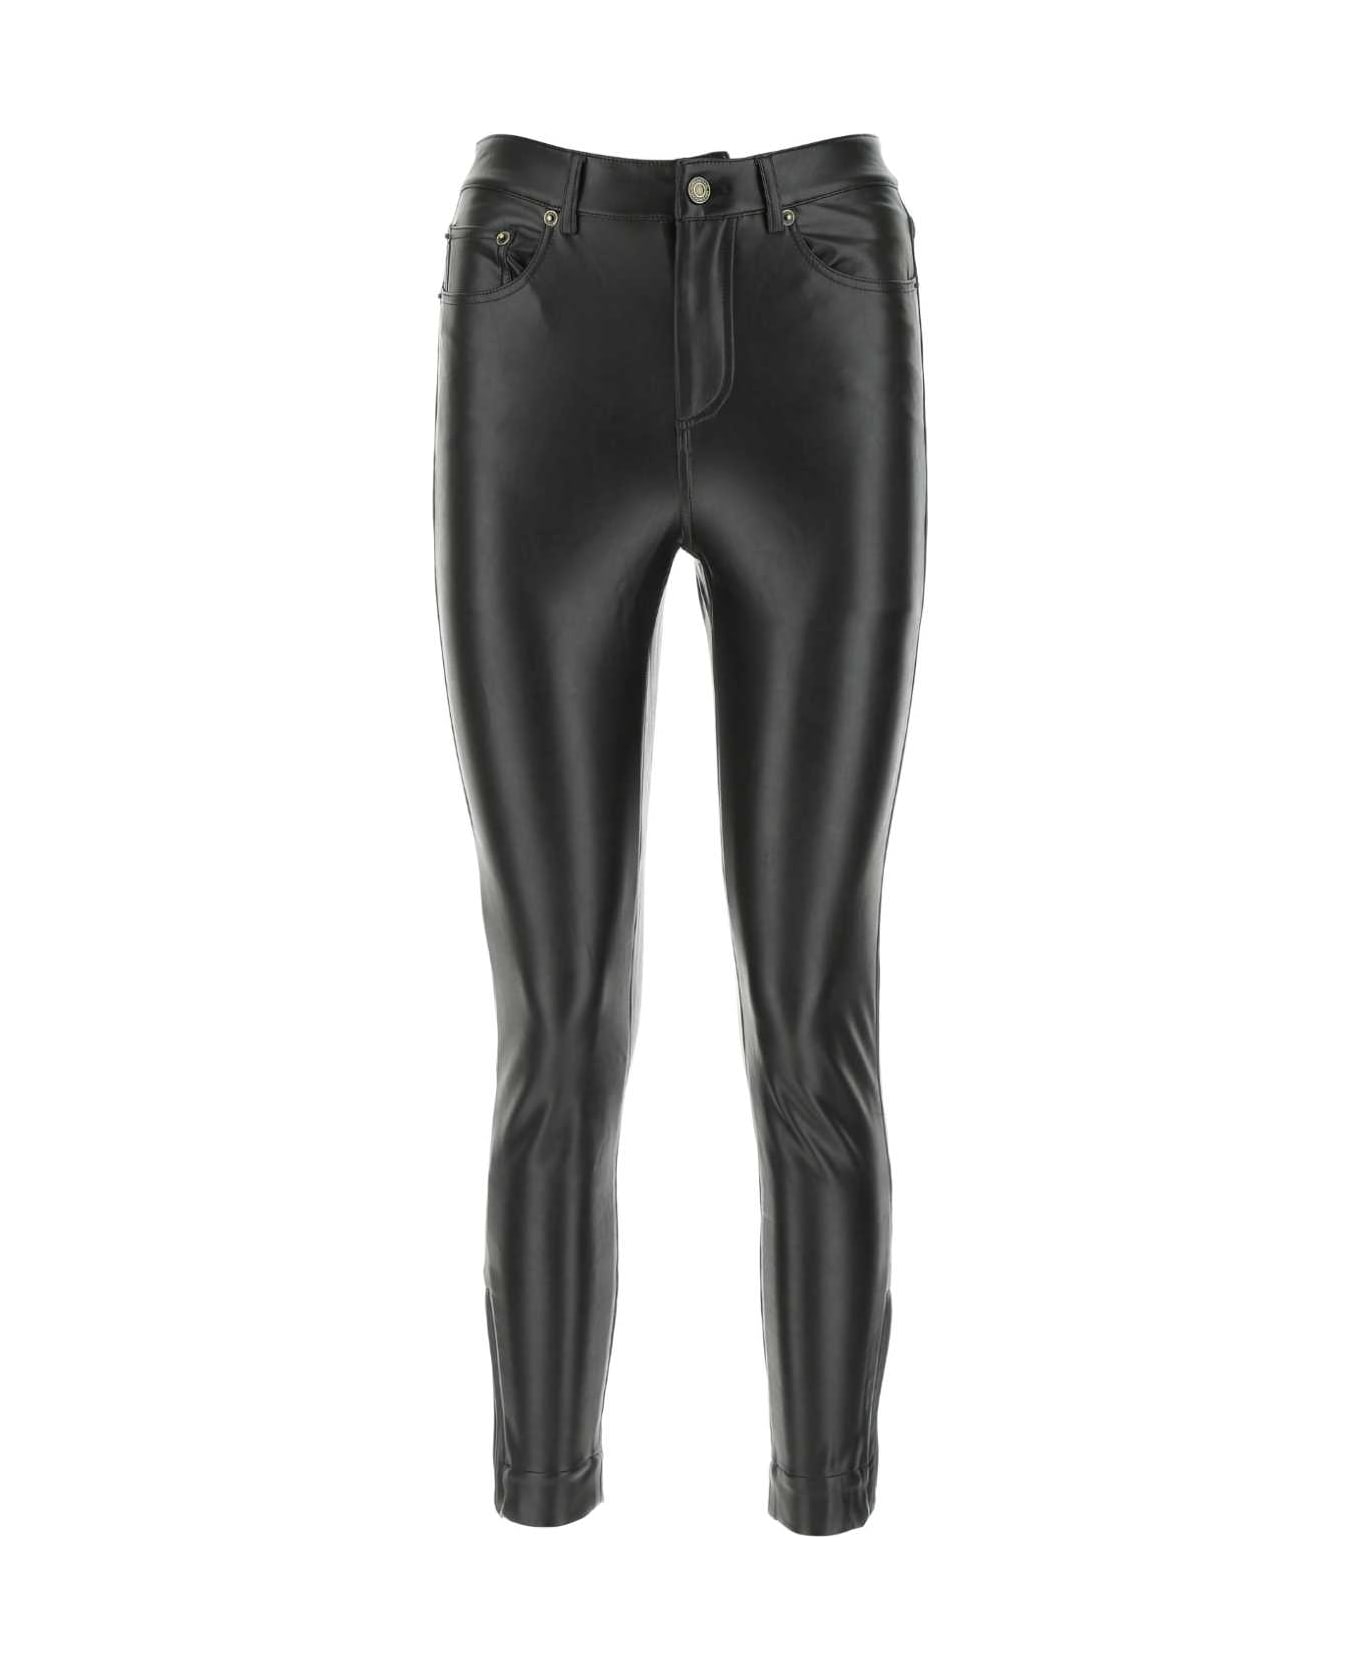 Michael Kors Black Synthetic Leather Pant - BLACK ボトムス